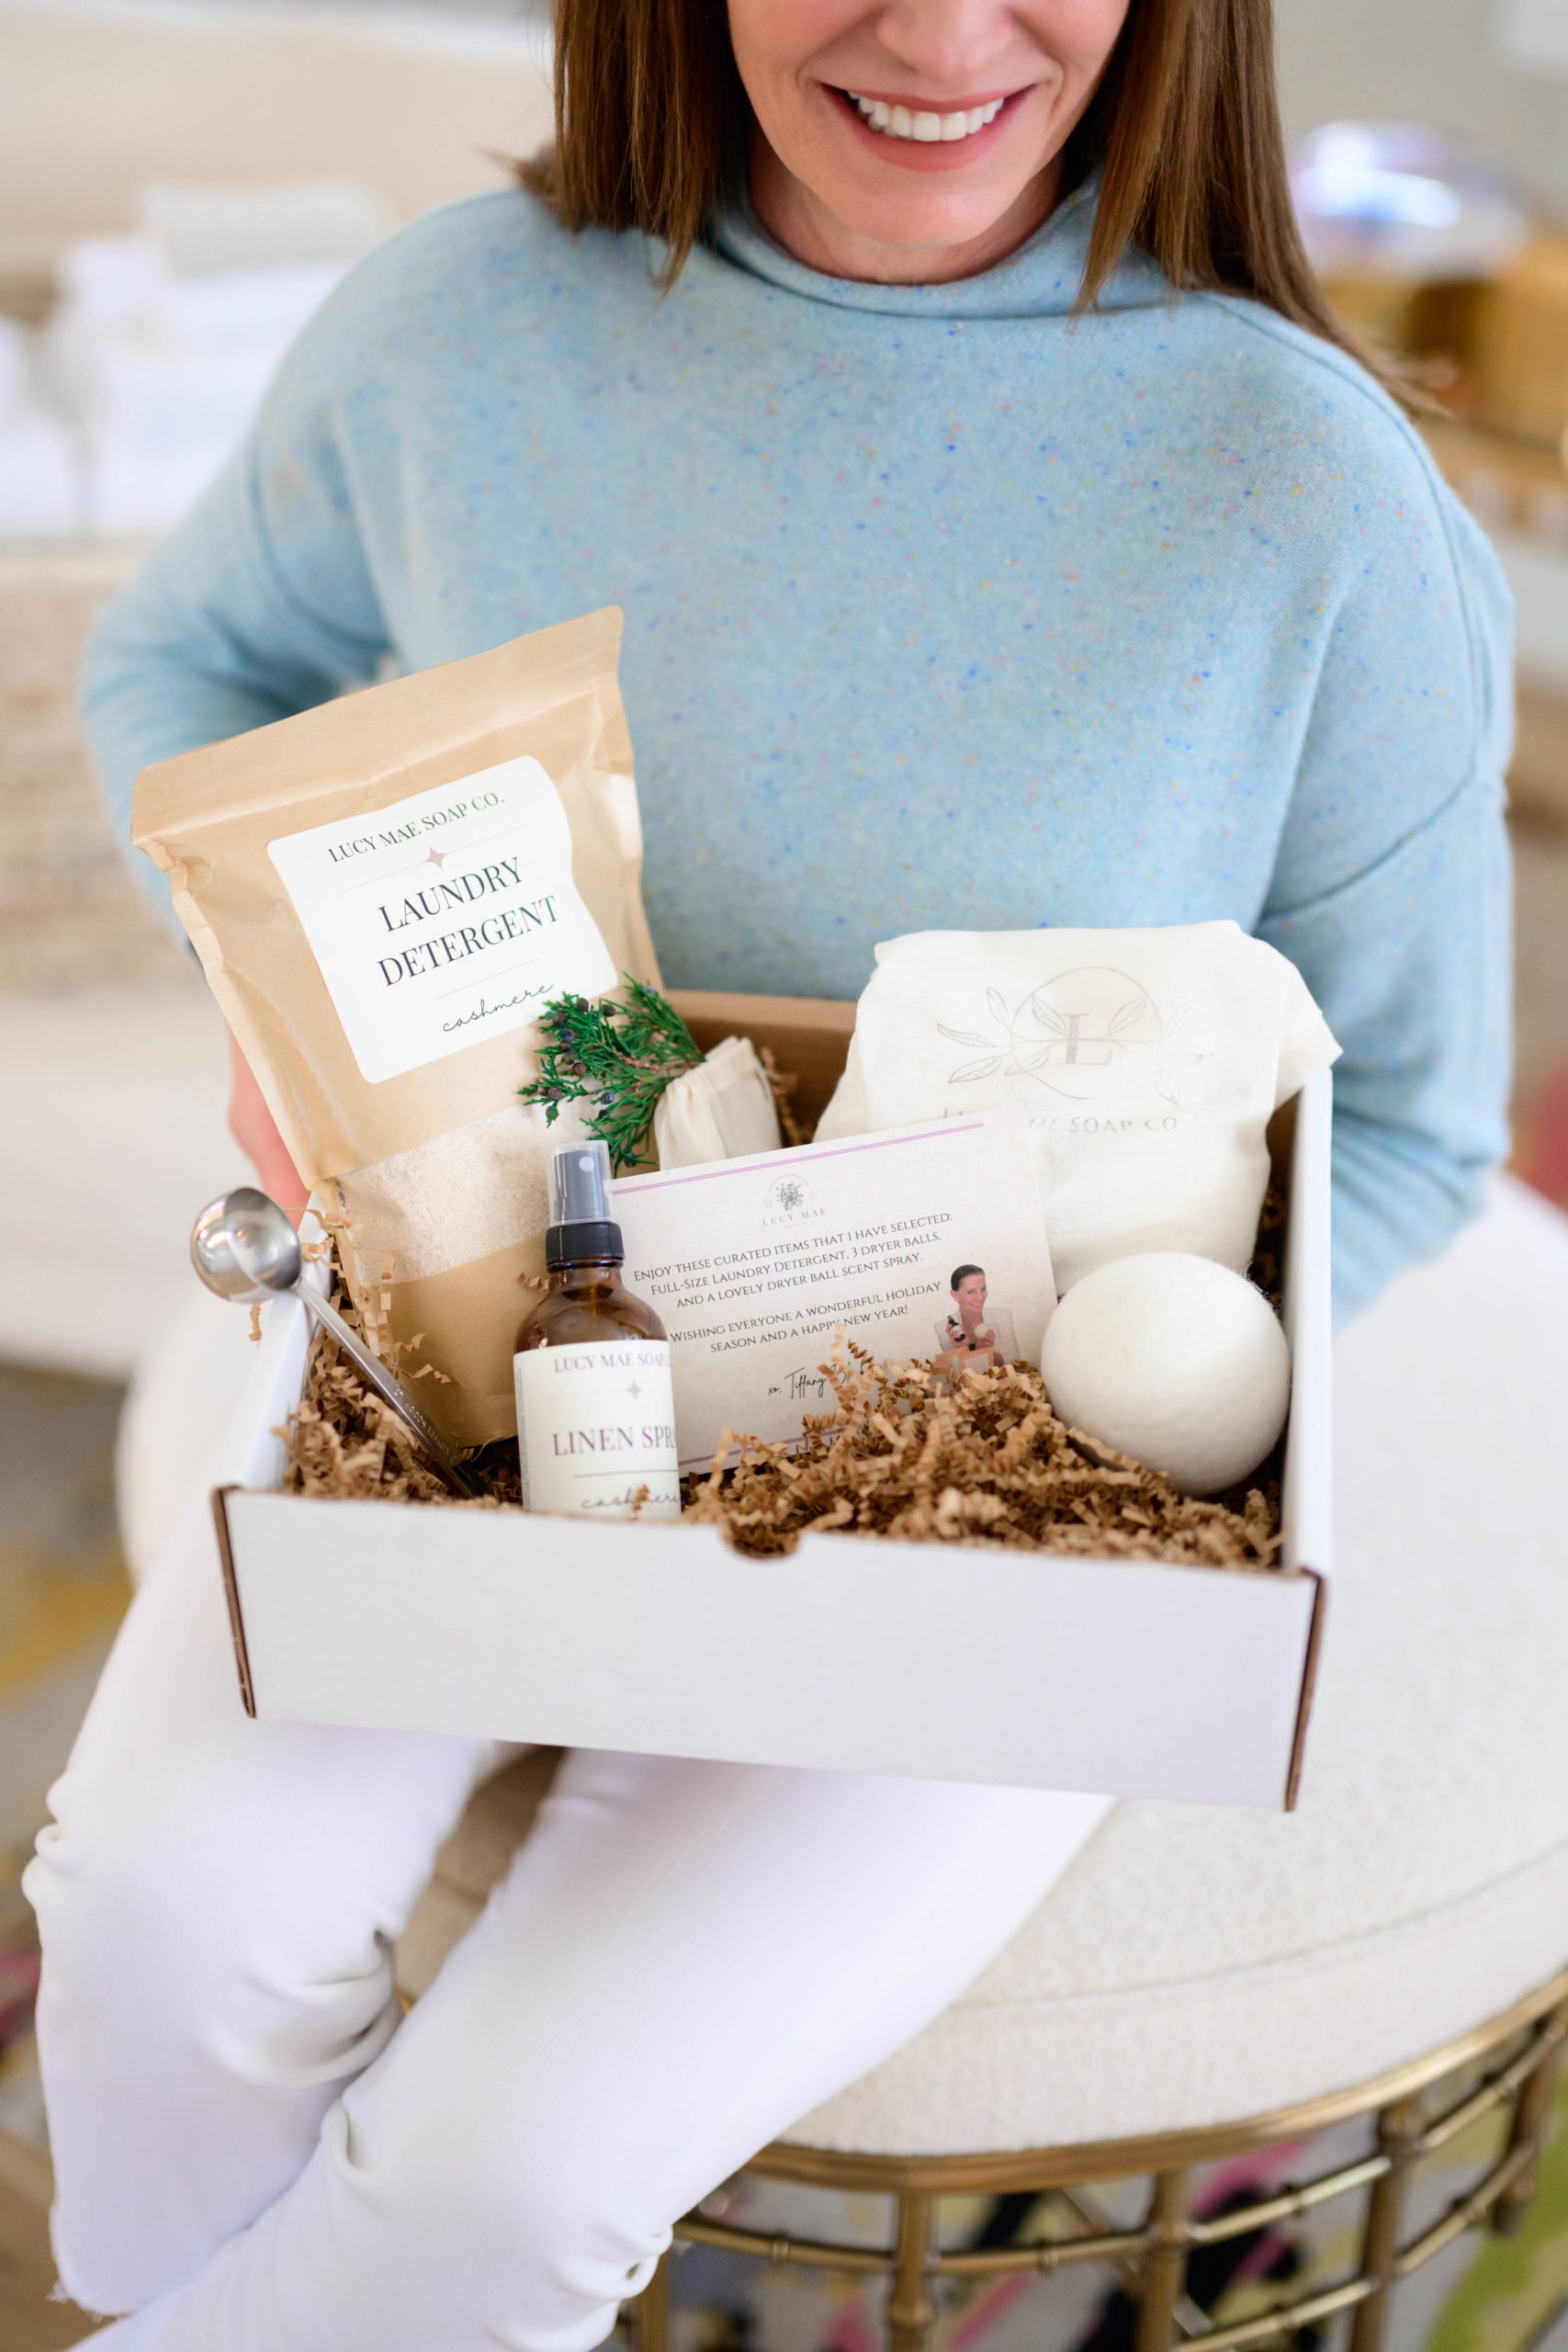 Holiday Gifting | Lucy Mae Soap Co. Holiday Bundle

#holiday #holidaygifting #gifting #presents #laundry #home #homeeseentials #detergent #laundrydetergent #dryer #dryerball #sensitiveskin #nontoxic #soaps #holidaygift #giftbundle #gifts #giftsforher #giftsforhim #giftsforeveryone 